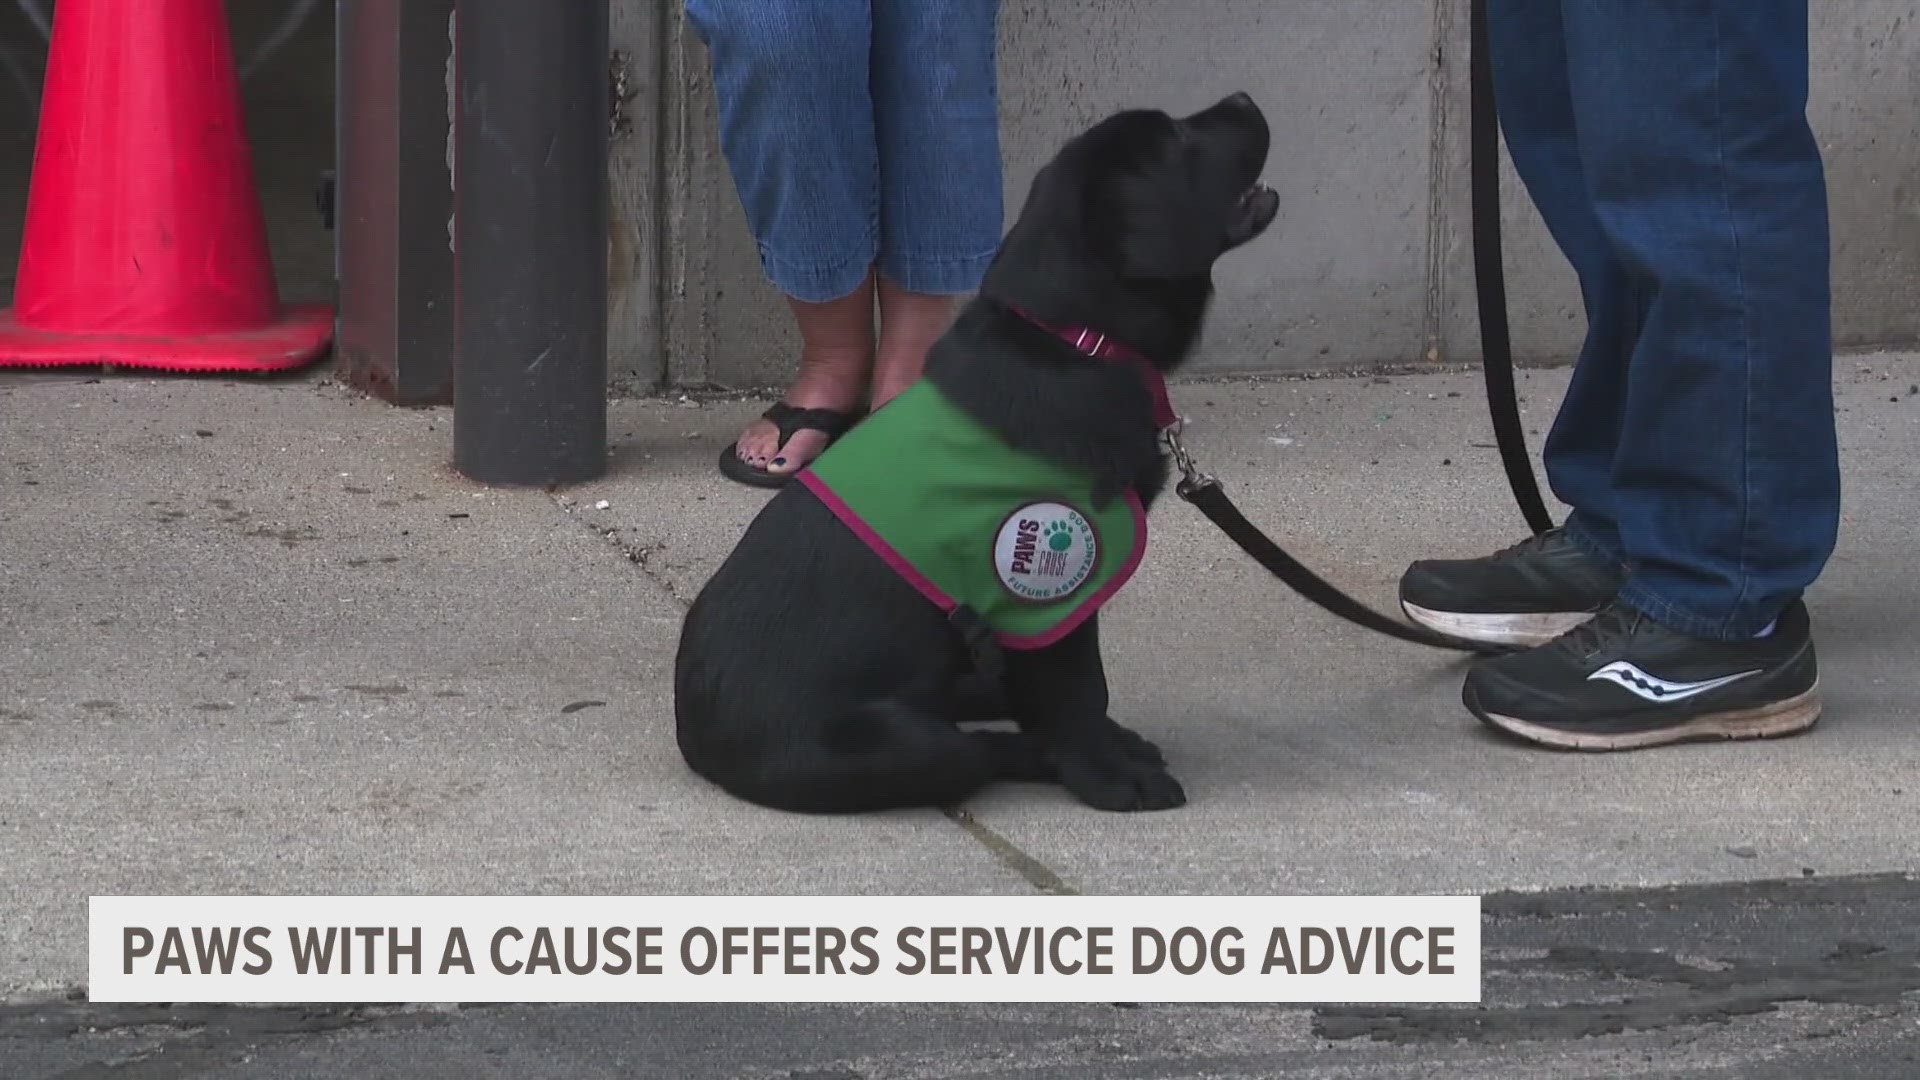 An update to the Air Carrier Access Act allowed airlines to no longer consider emotional support animals as service dogs.